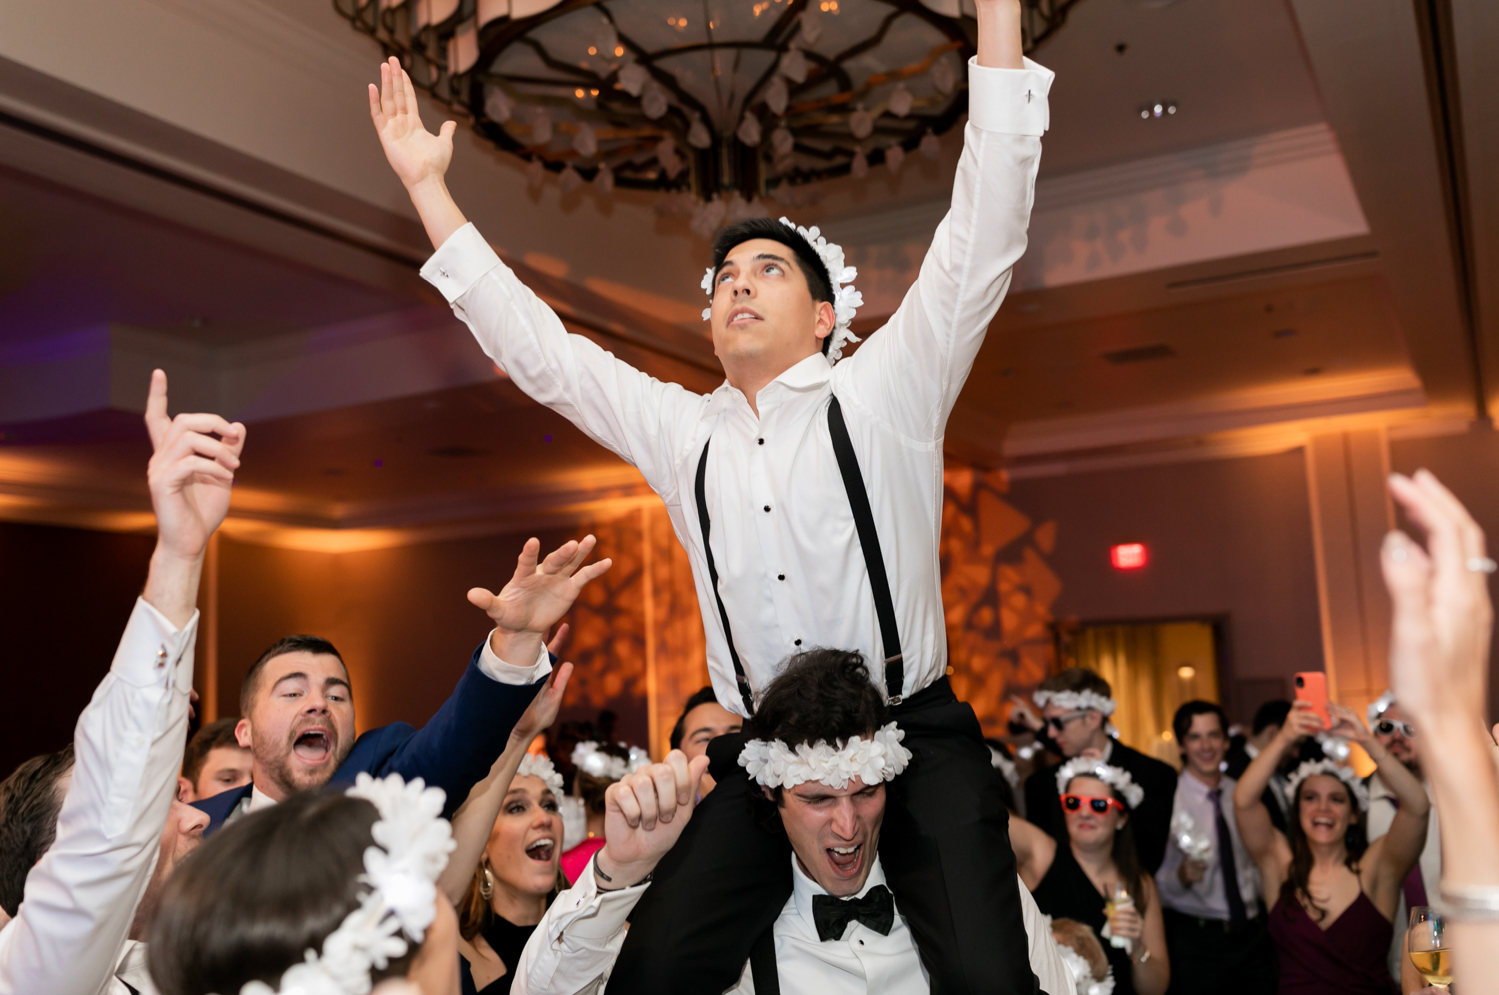 A guest sits on his friends shoulders, wearing flower crowns and dancing with friends at the reception.